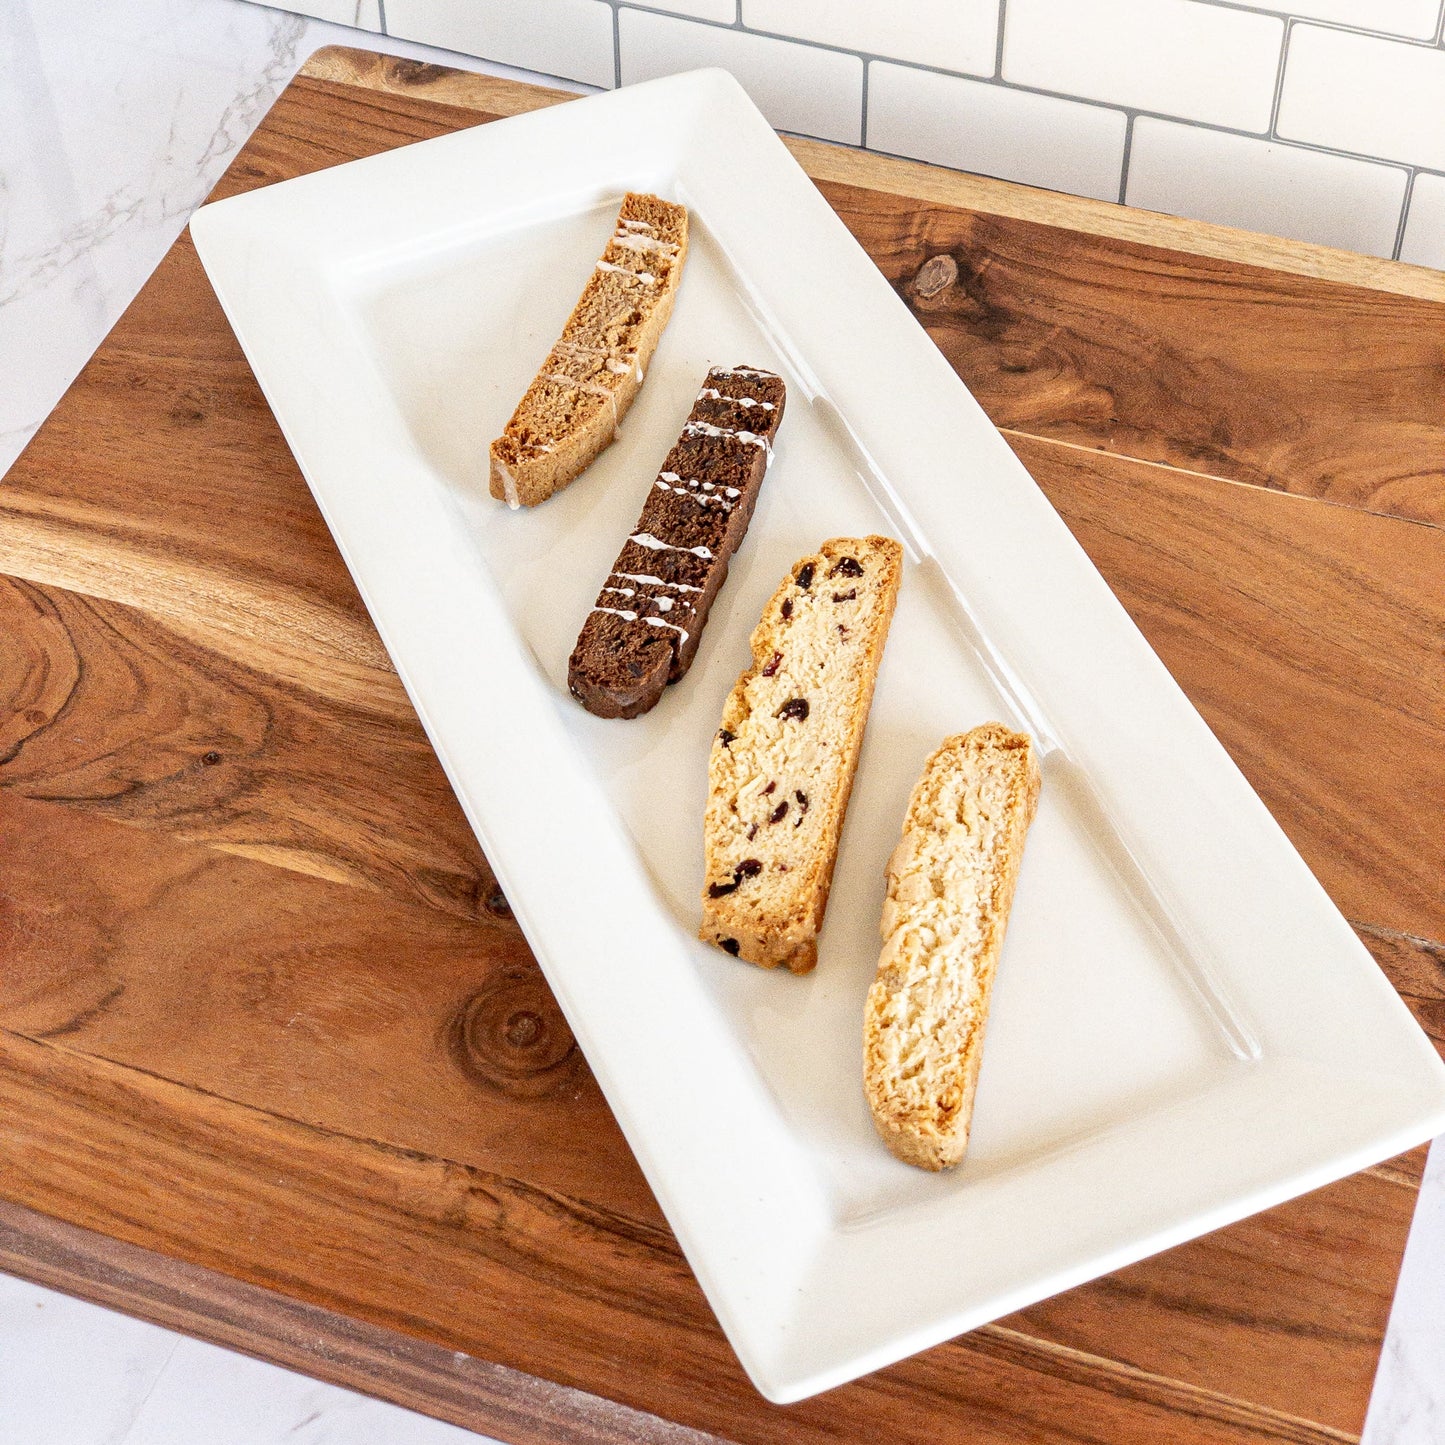 Handcrafted Italian Style Biscotti Baked Goods - The Meeting Place on Market